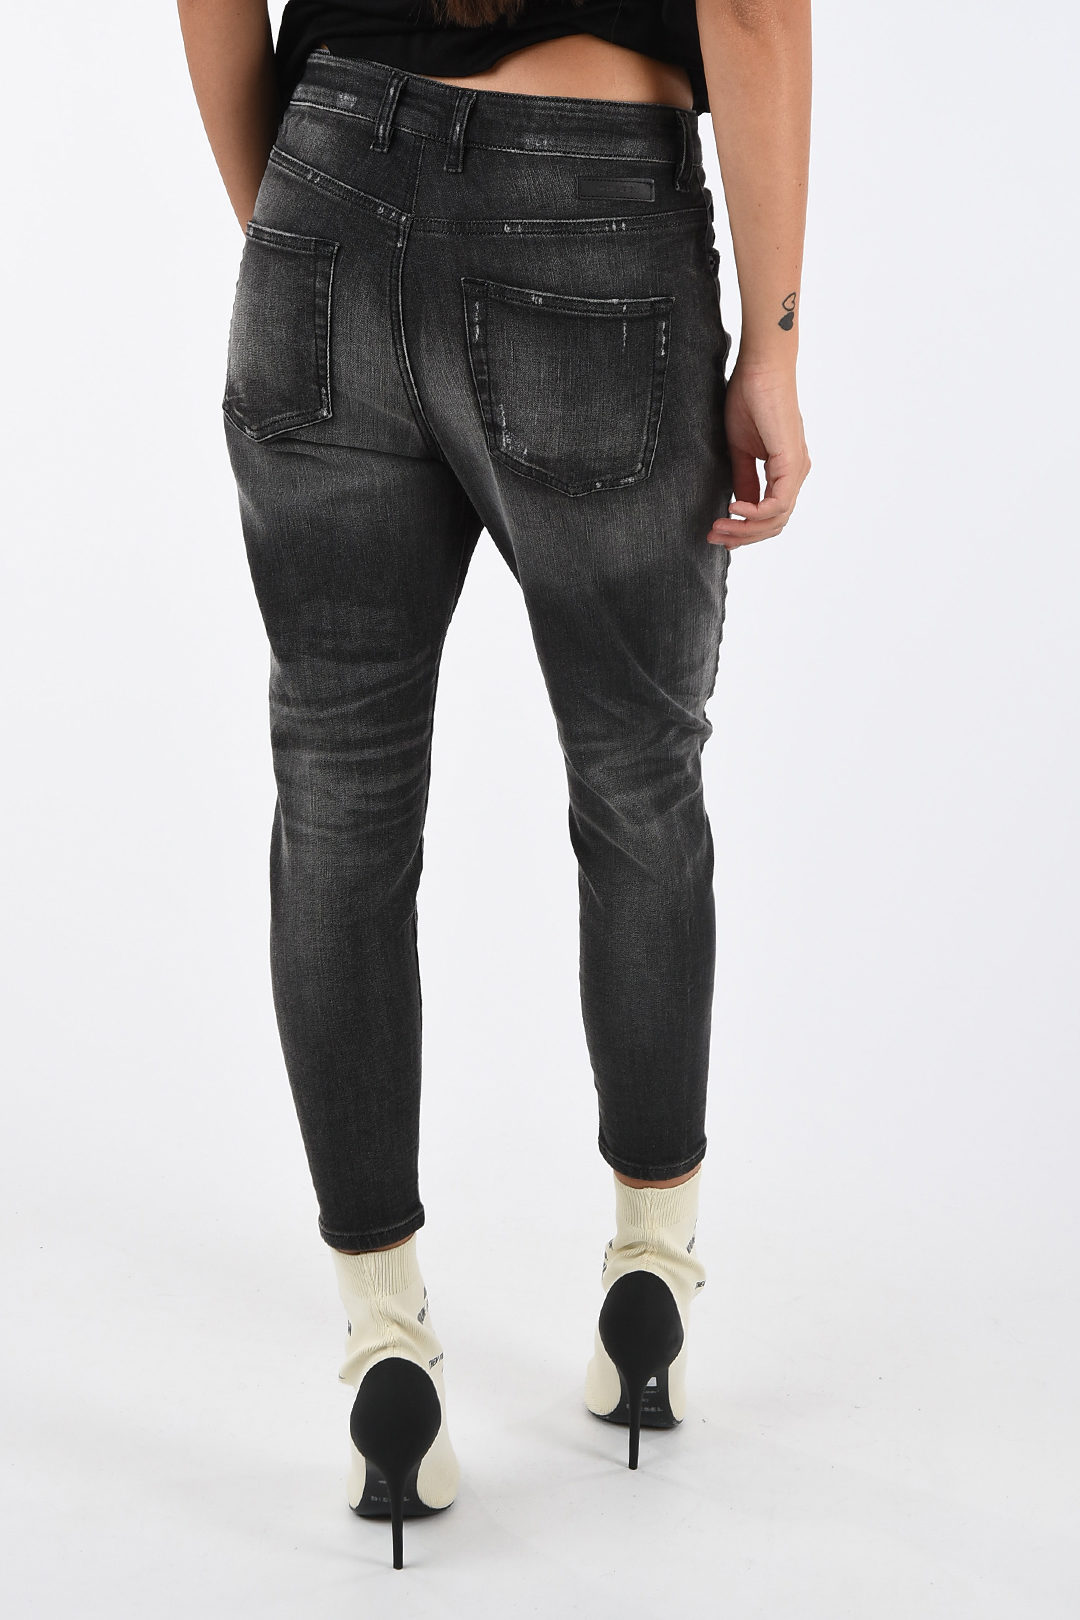 Republiek voor mij Albany Diesel Stone Washed CANDYS-T Jogg Jeans women - Glamood Outlet